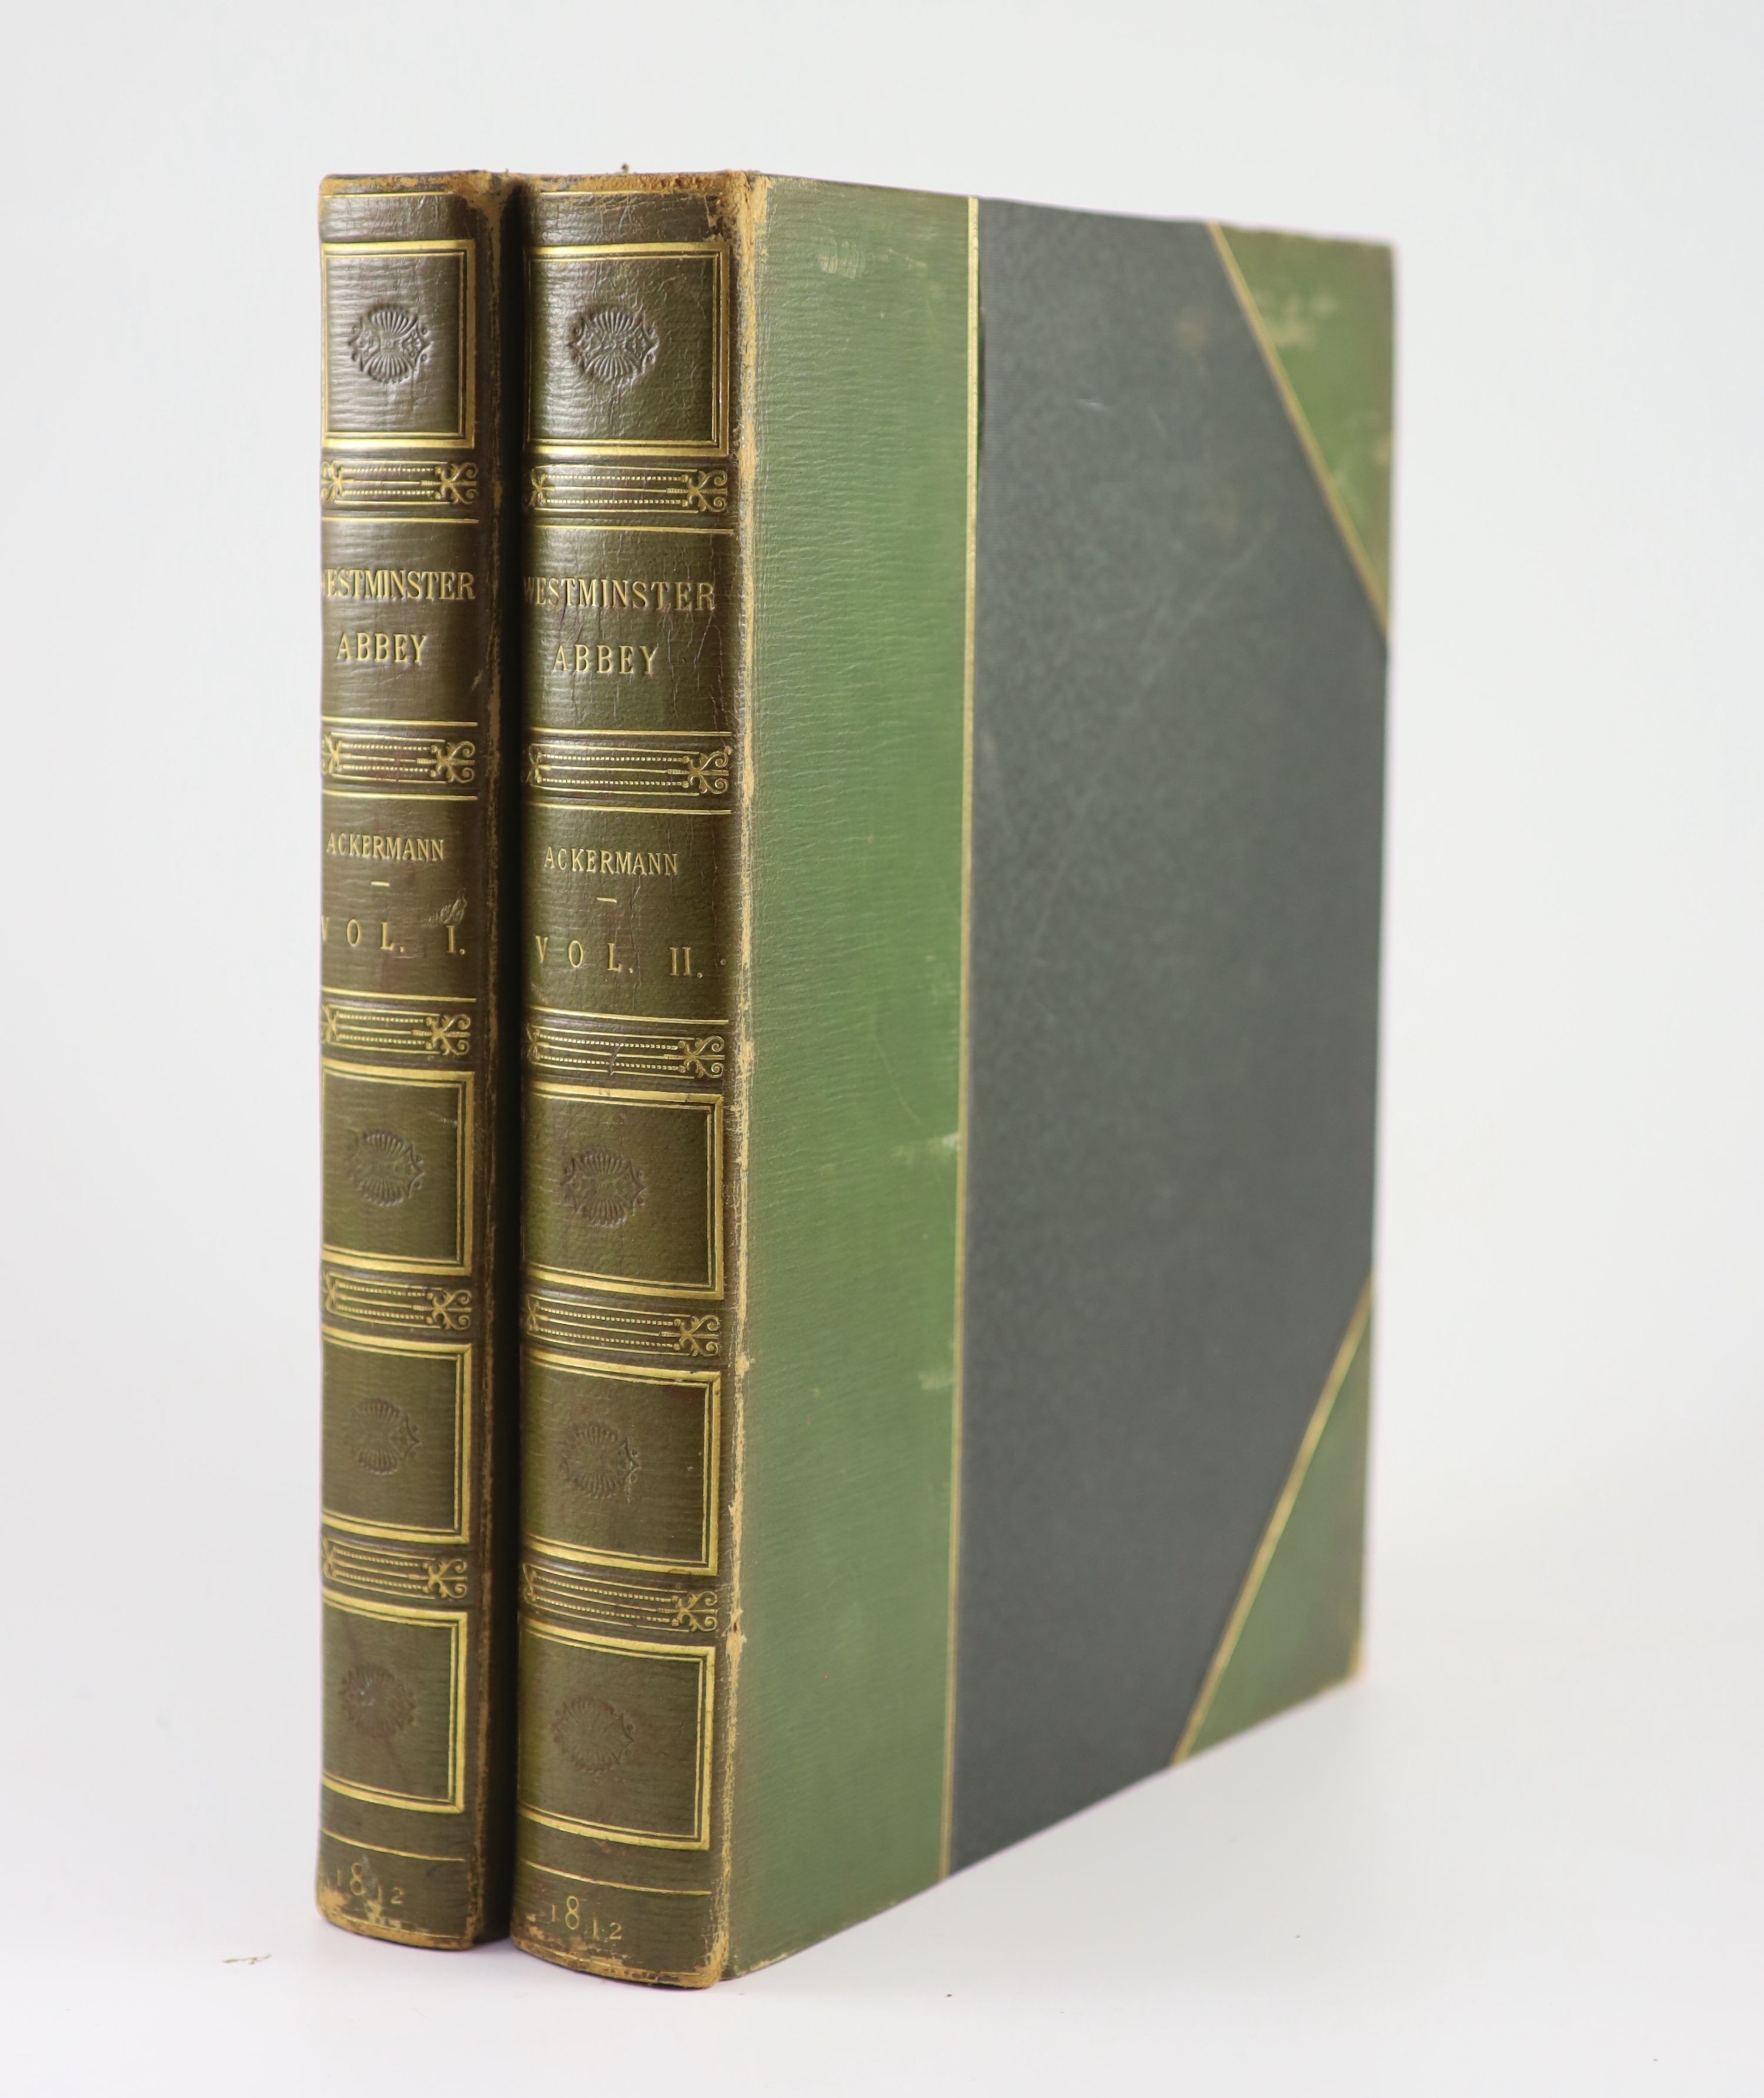 Ackermann Publications, Rudolph - The History of the Abbey Church of St. Peter’s Westminster, 1st edition, 2 vols, qto, half green morocco, with plan, portrait and 81 hand-coloured plates, London, 1812